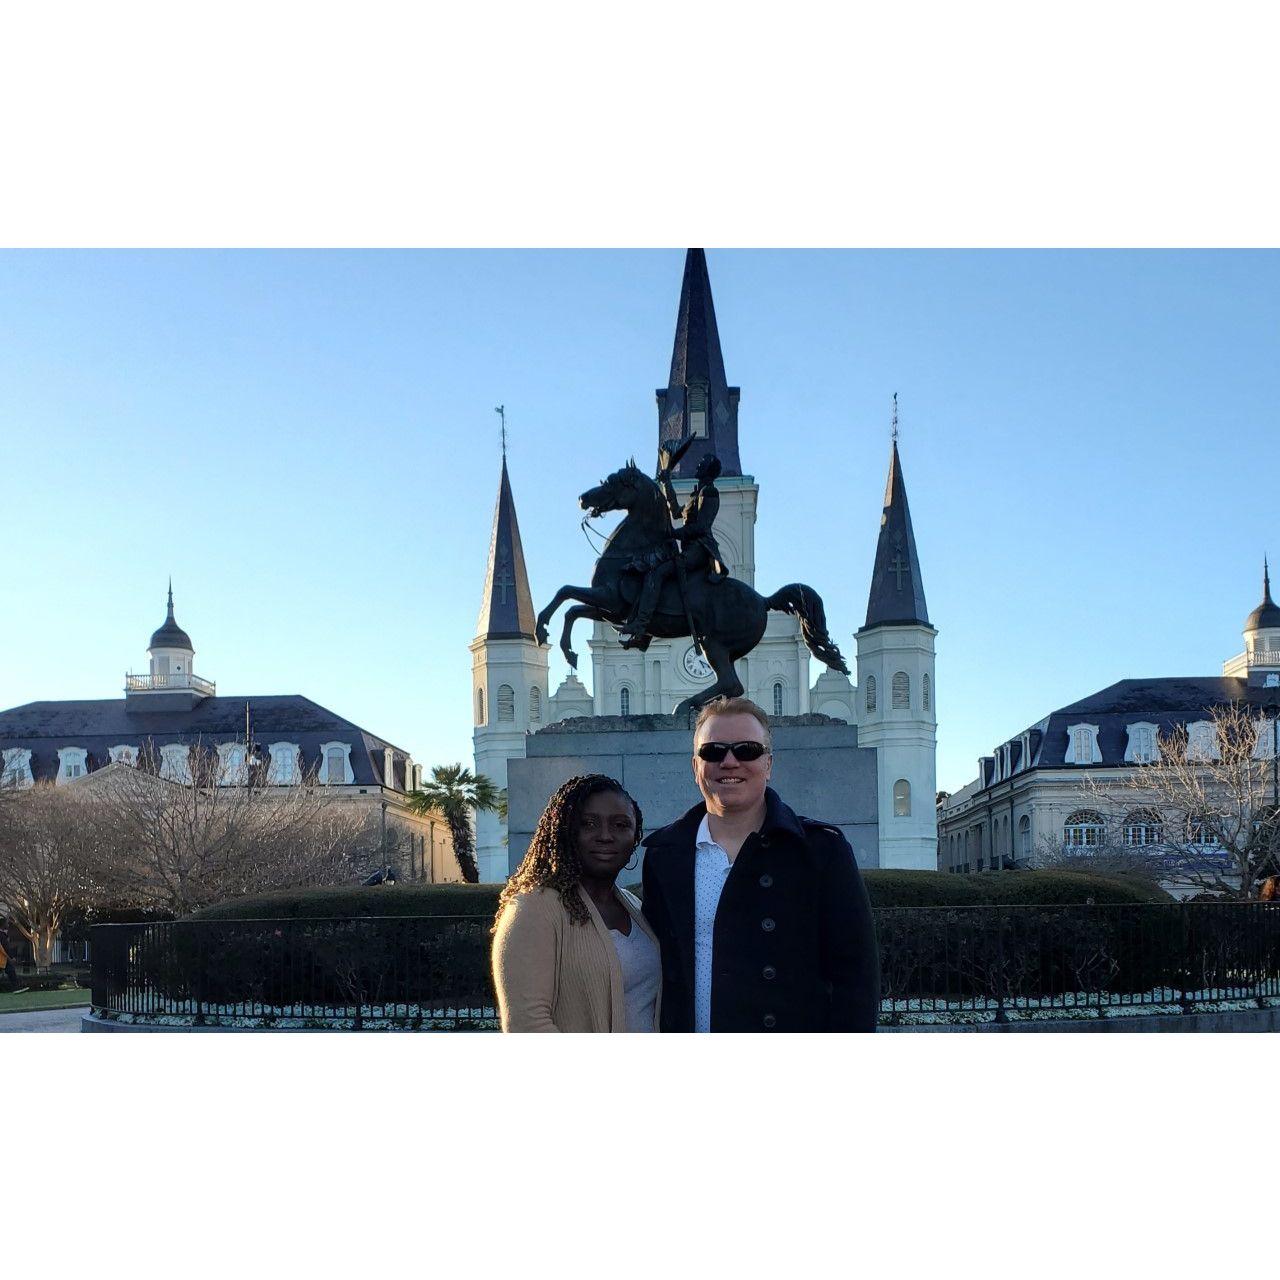 Our trip to New Orleans!